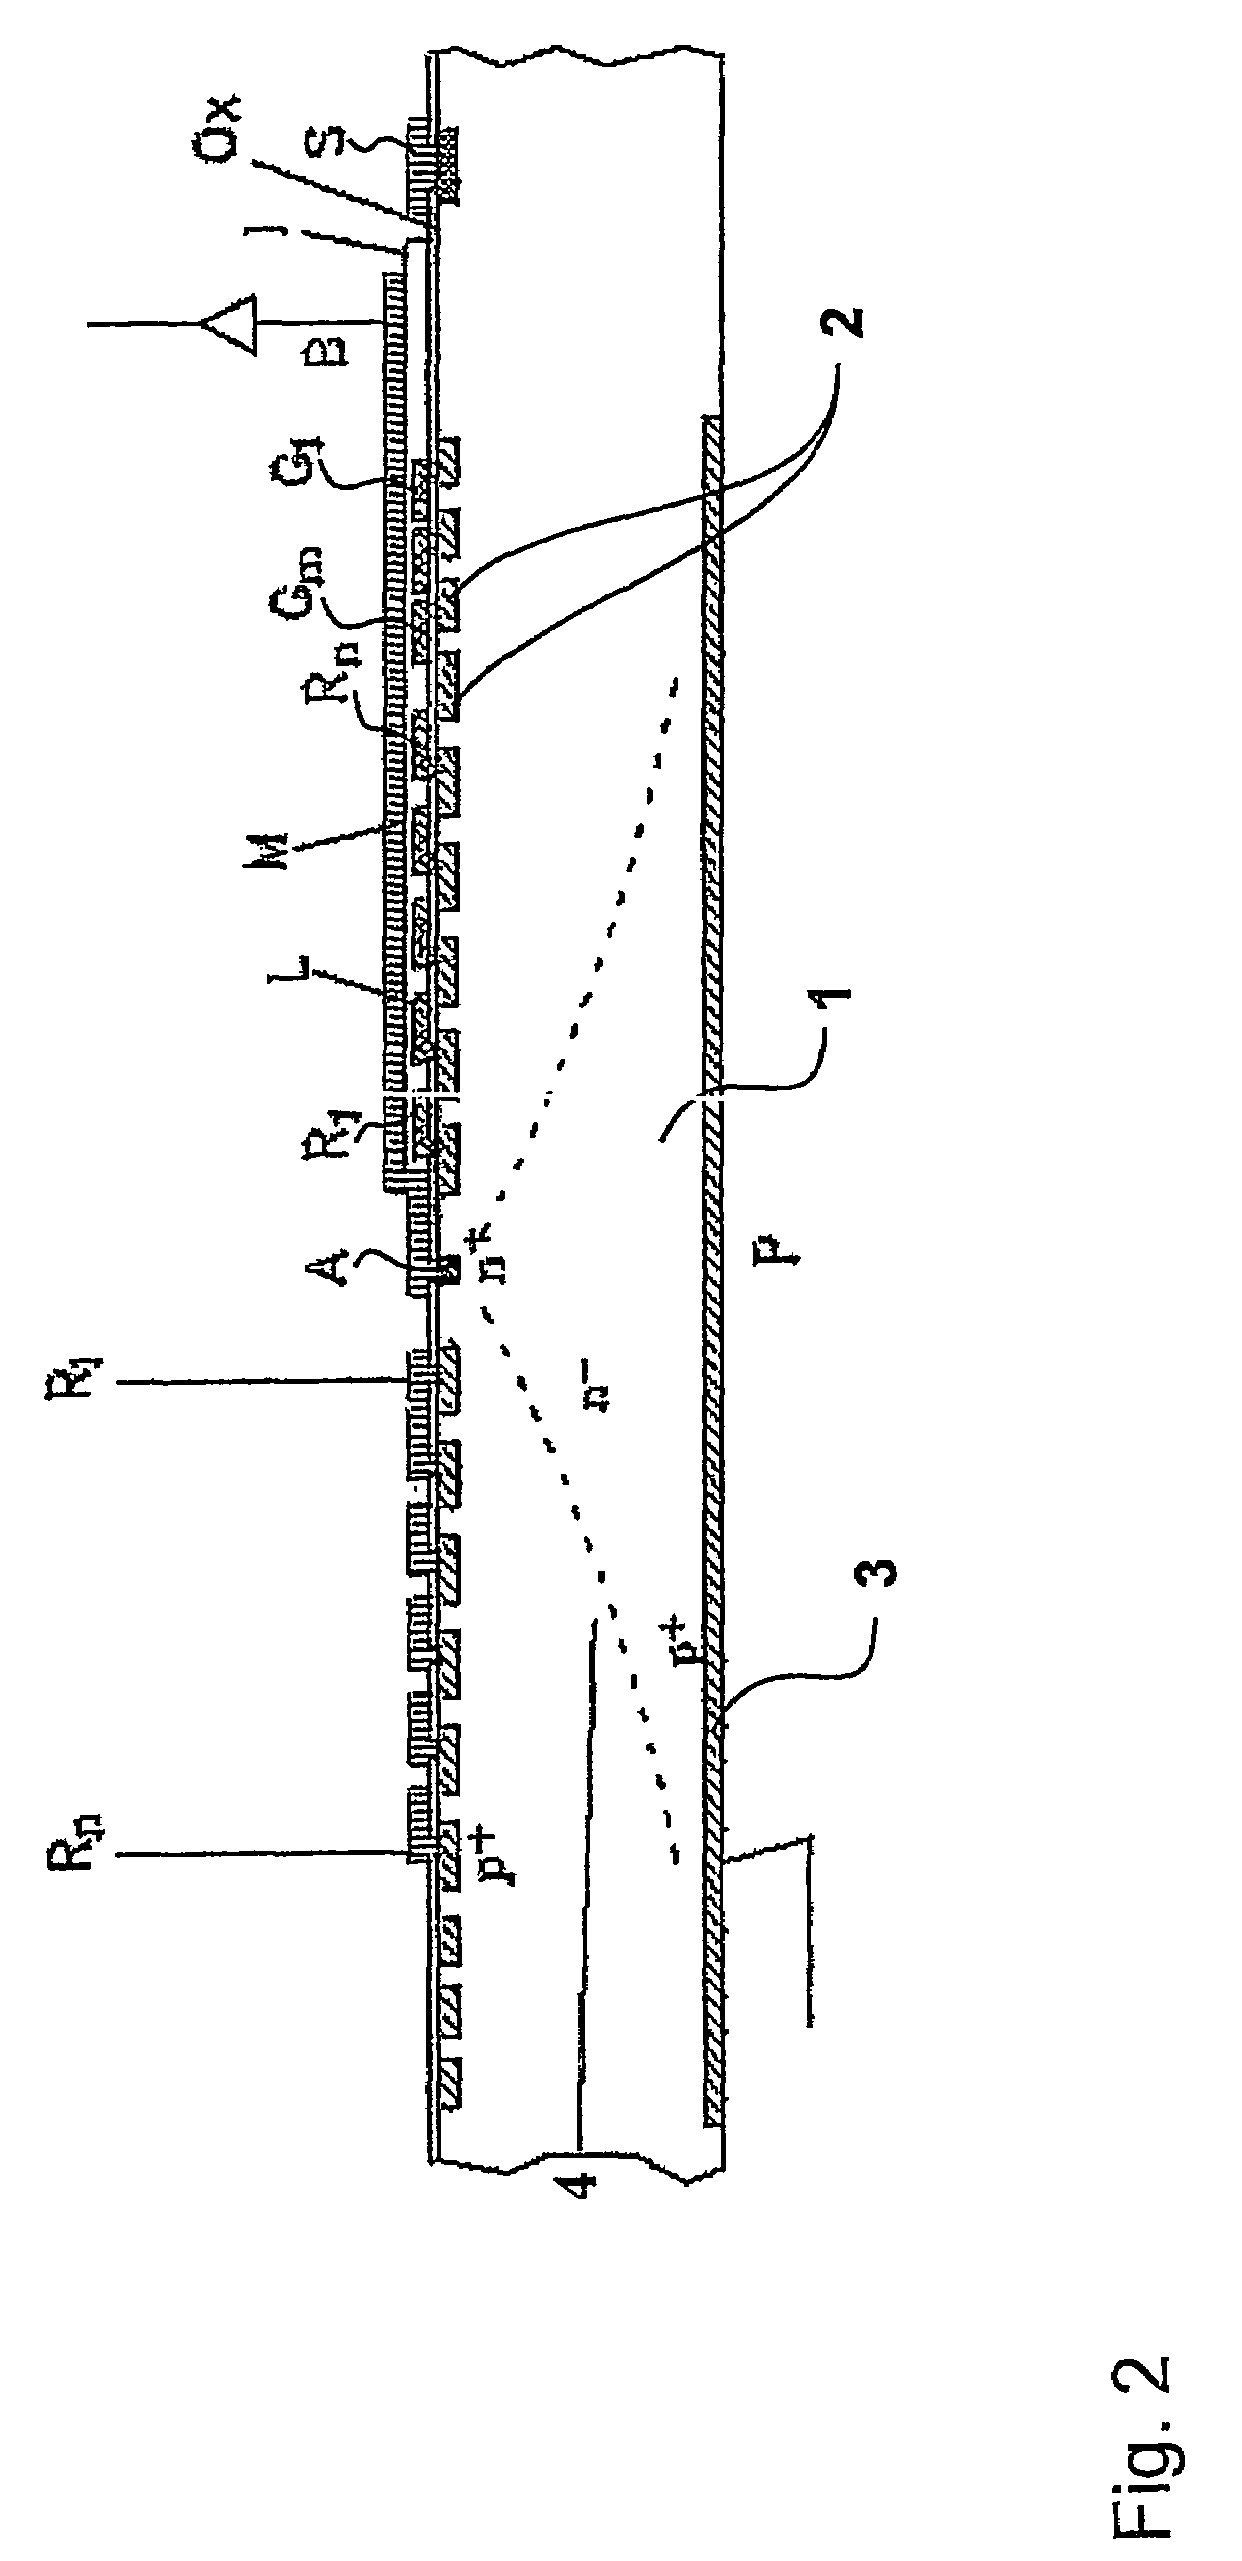 Conductor crossover for a semiconductor detector